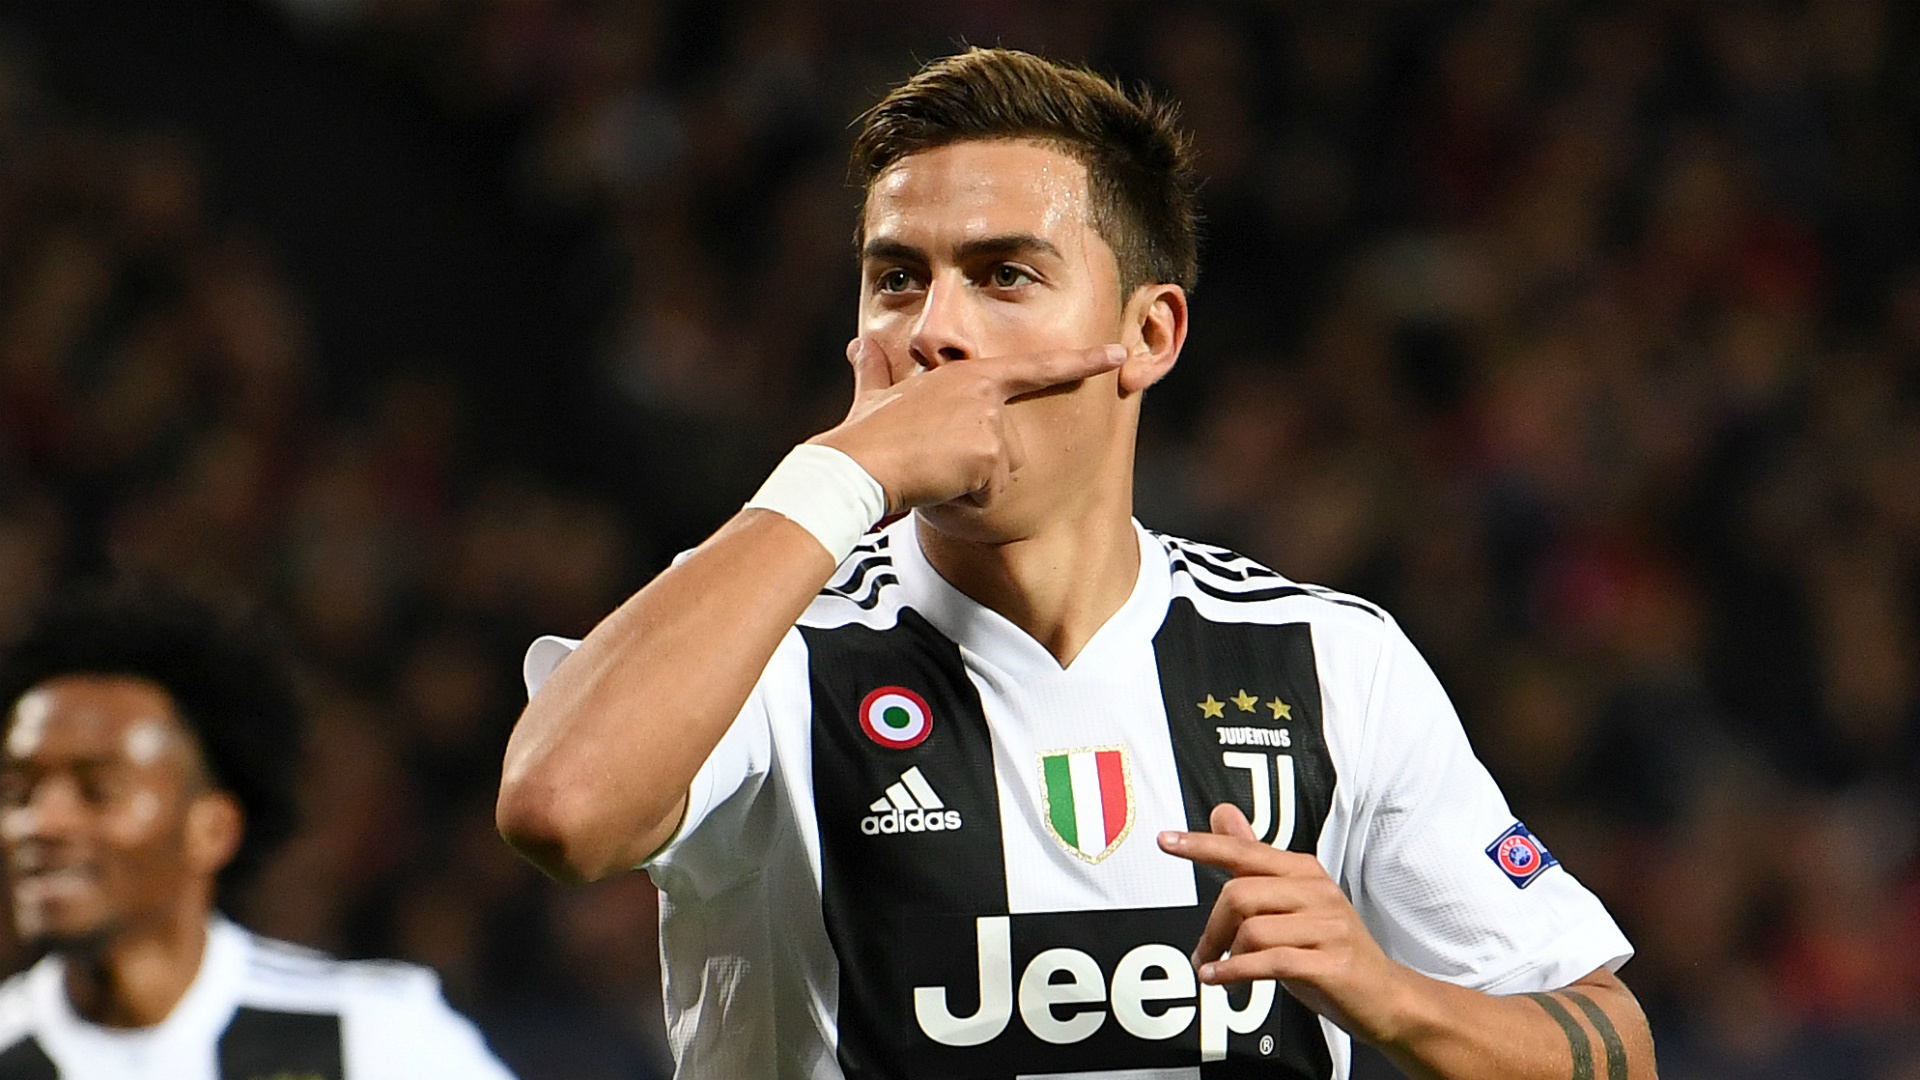 Dybala: Often regarded as the ‘New Messi’ because of his creative play and extraordinary skills. 1920x1080 Full HD Background.